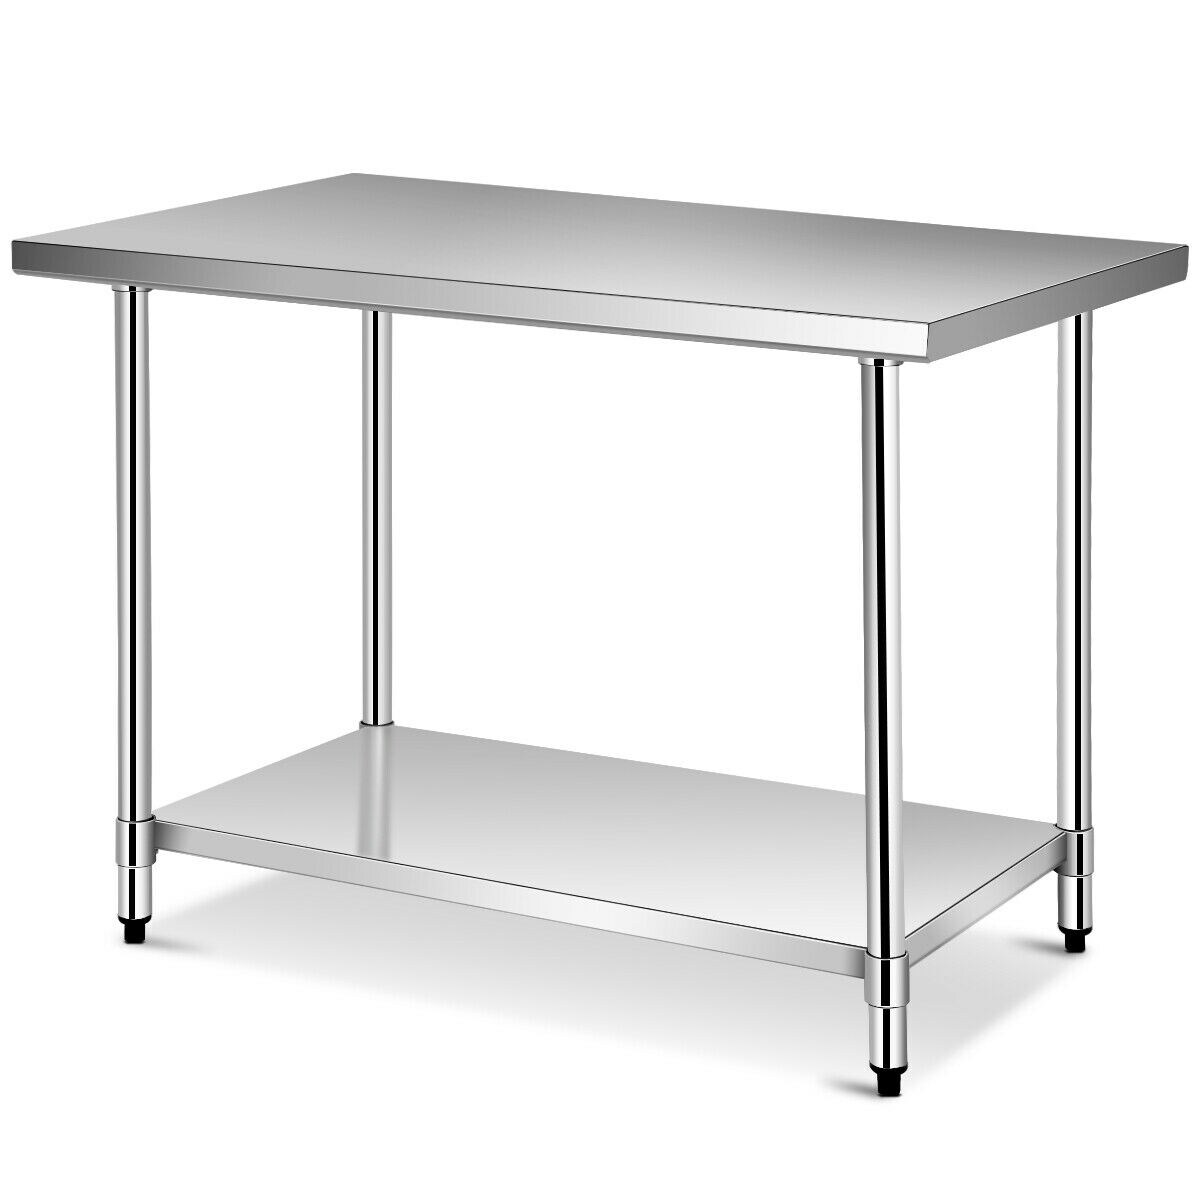 Gymax 30 x 48 Stainless Steel Food Prep and Work Table Commercial Kitchen Table Silver